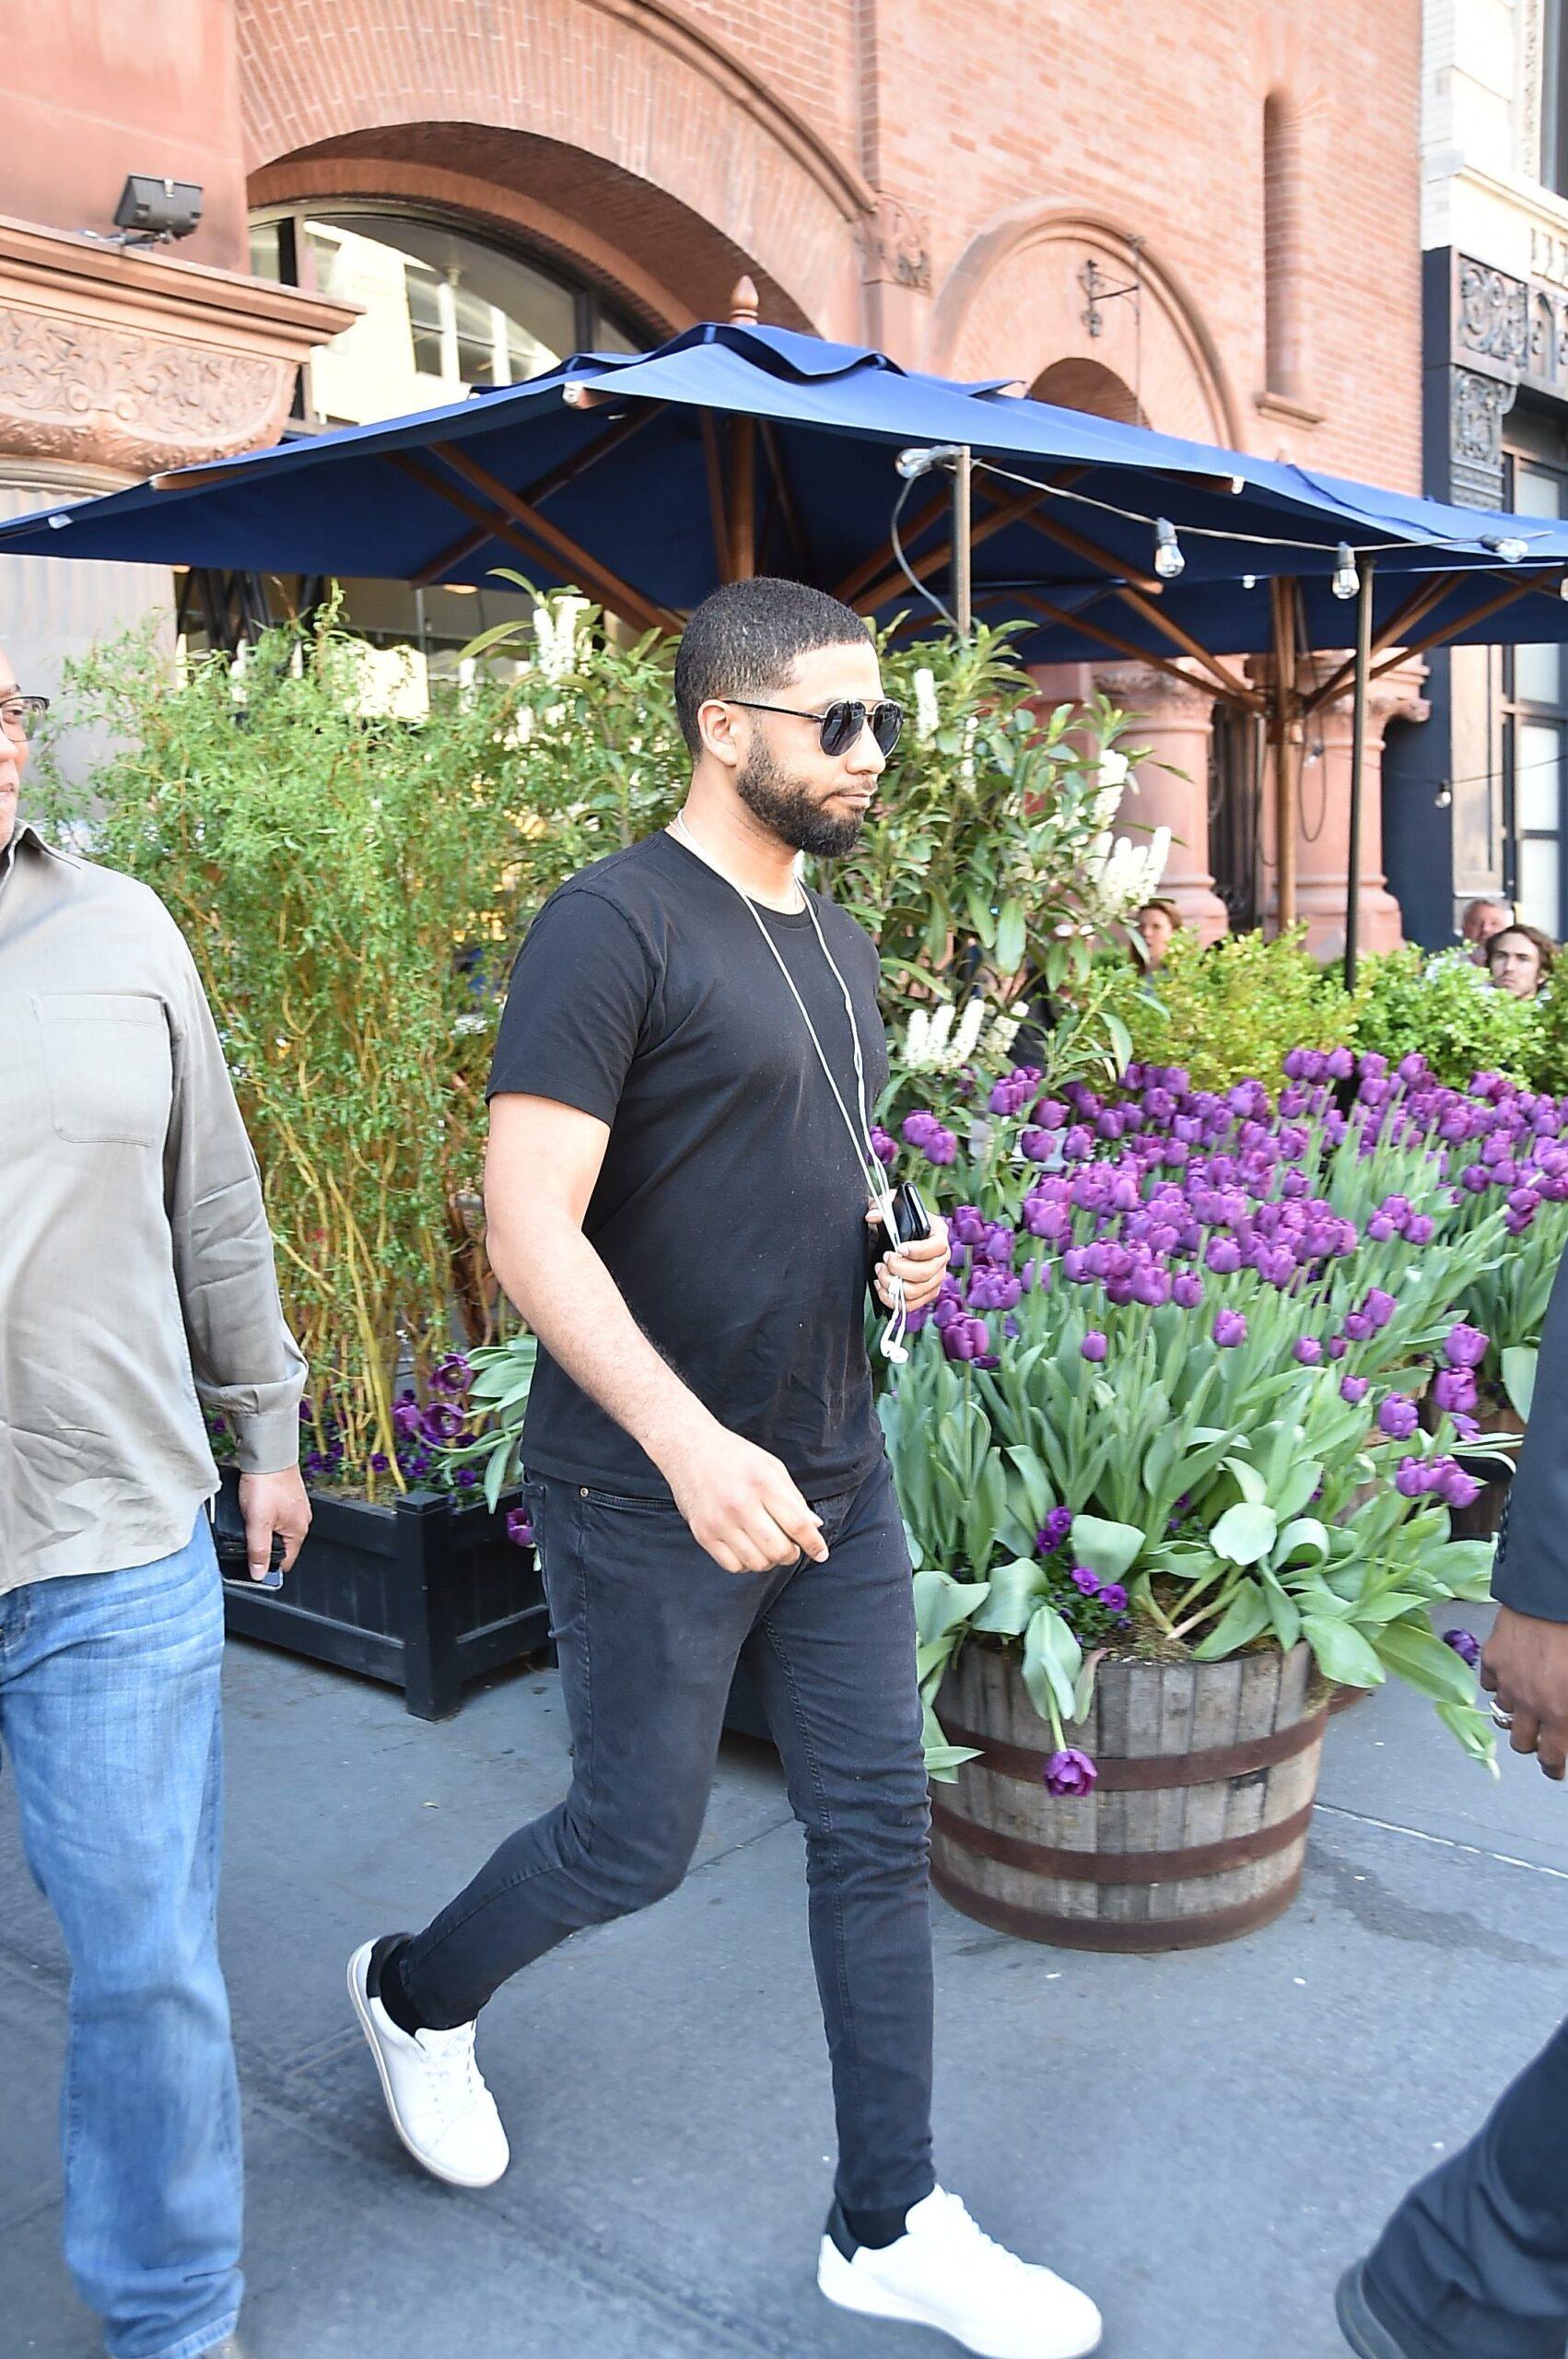 Jussie Smollet spotted in New York on the day of what could be his final appearance on apos Empire apos